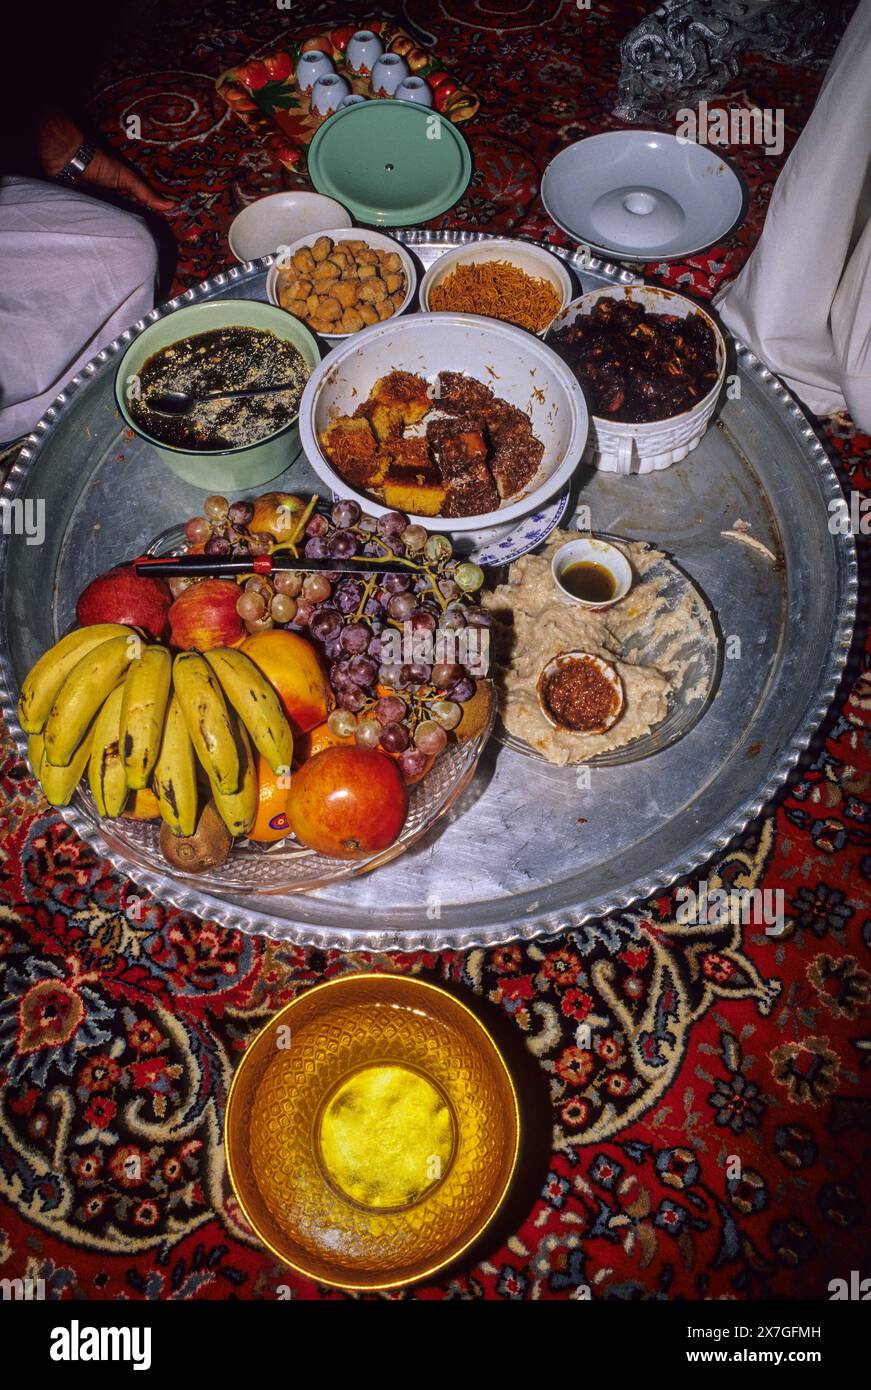 Mudayrib, Oman, Arabian Peninsula, Middle East - Lunch on the Eid al-Adha (Feast of the Sacrifice), the annual feast through which Muslims commemorate Stock Photo